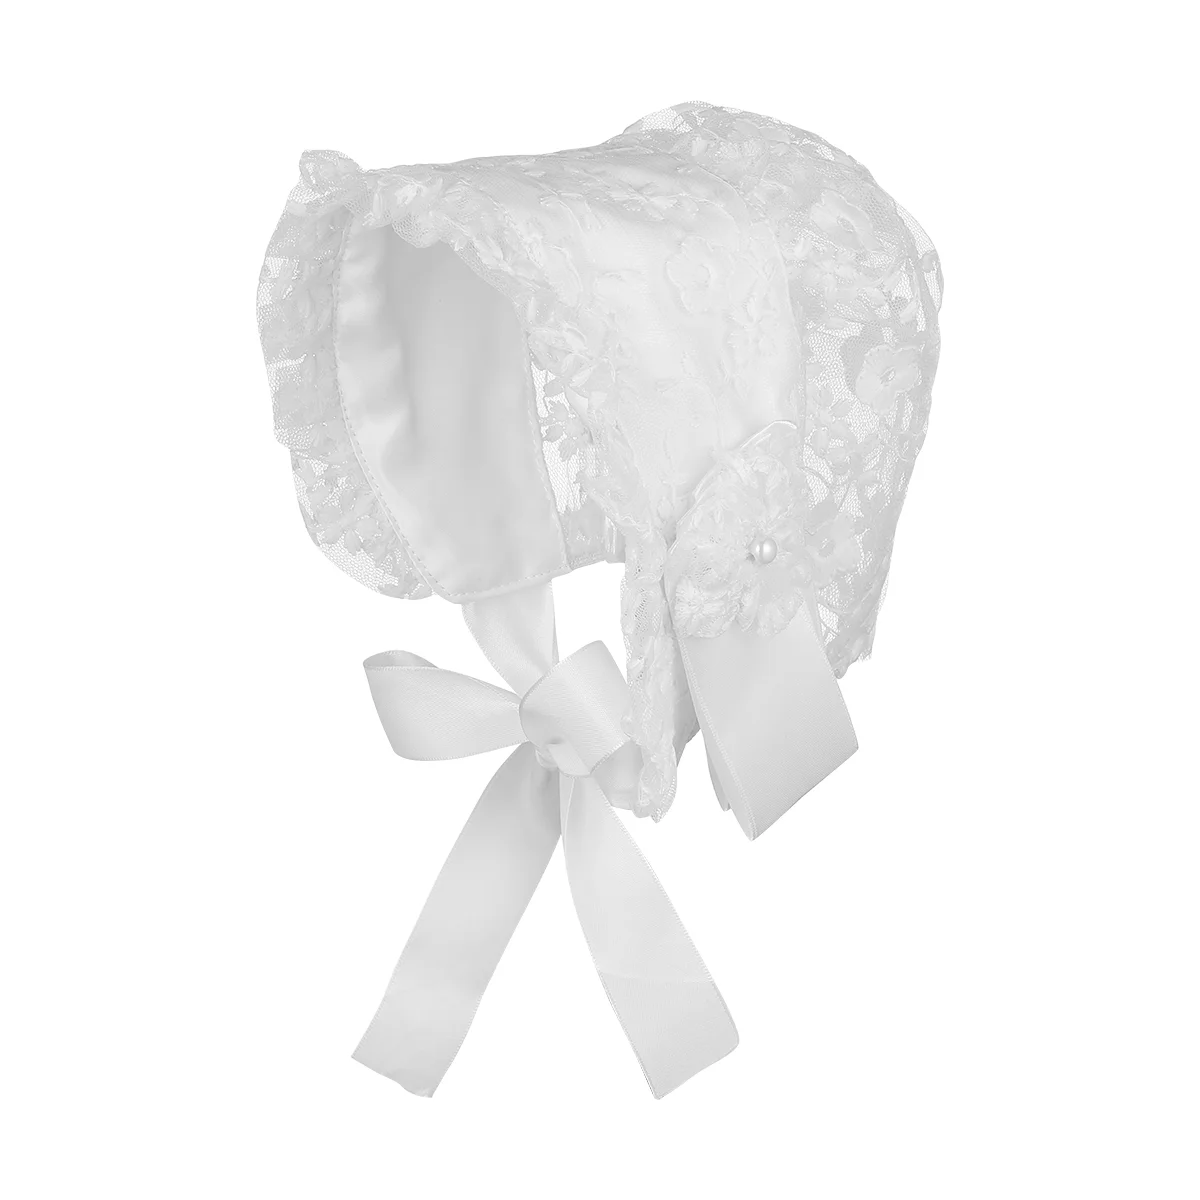 

Fenical Adorable Baby Lace Beautiful Hat for Baby Infant Aged From 0-2 (White, Average Size)